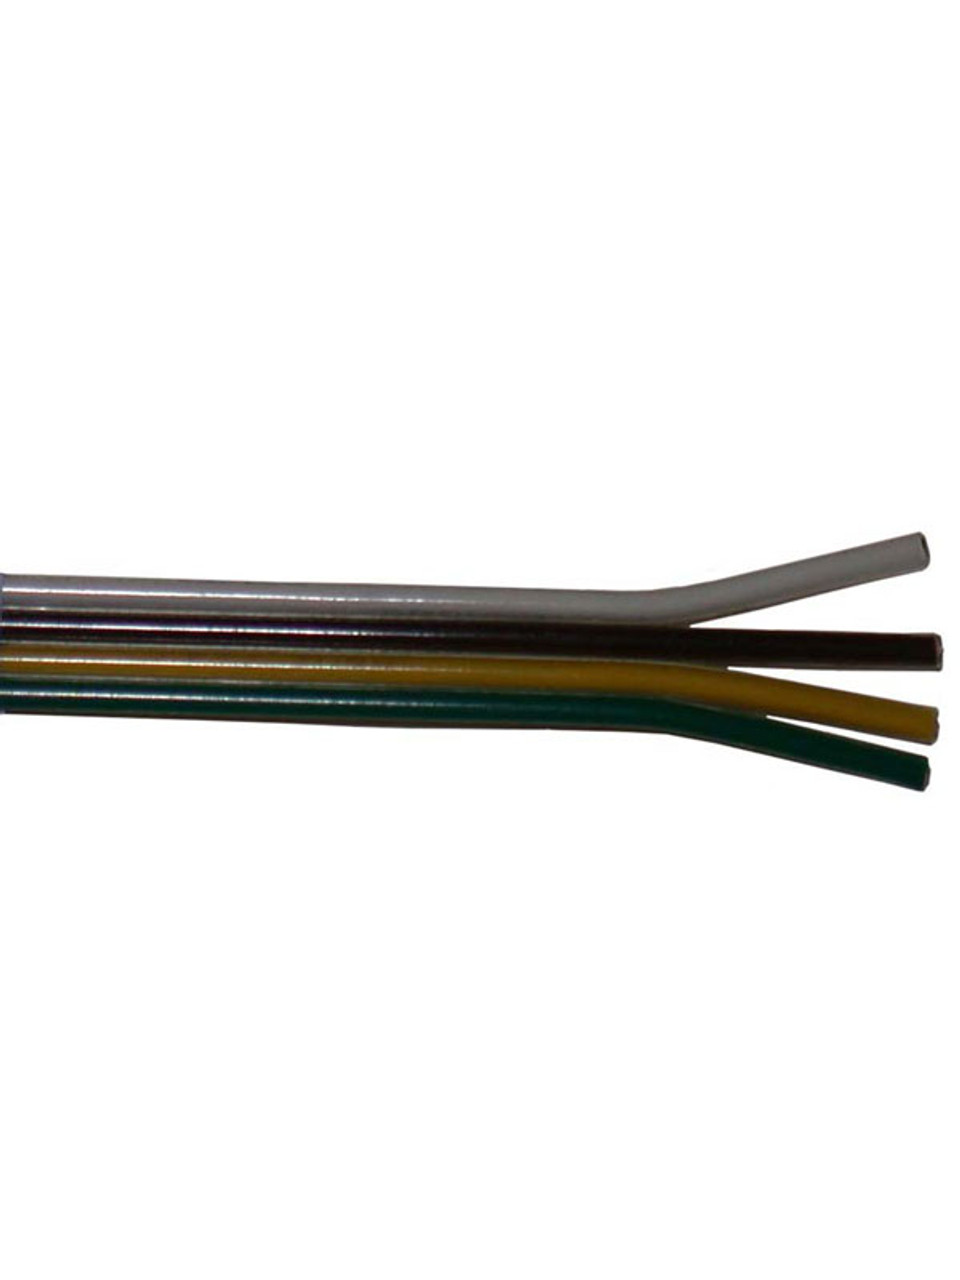 P4185 --- Parallel Trailer Cable, 4 Wire, 18 Gauge